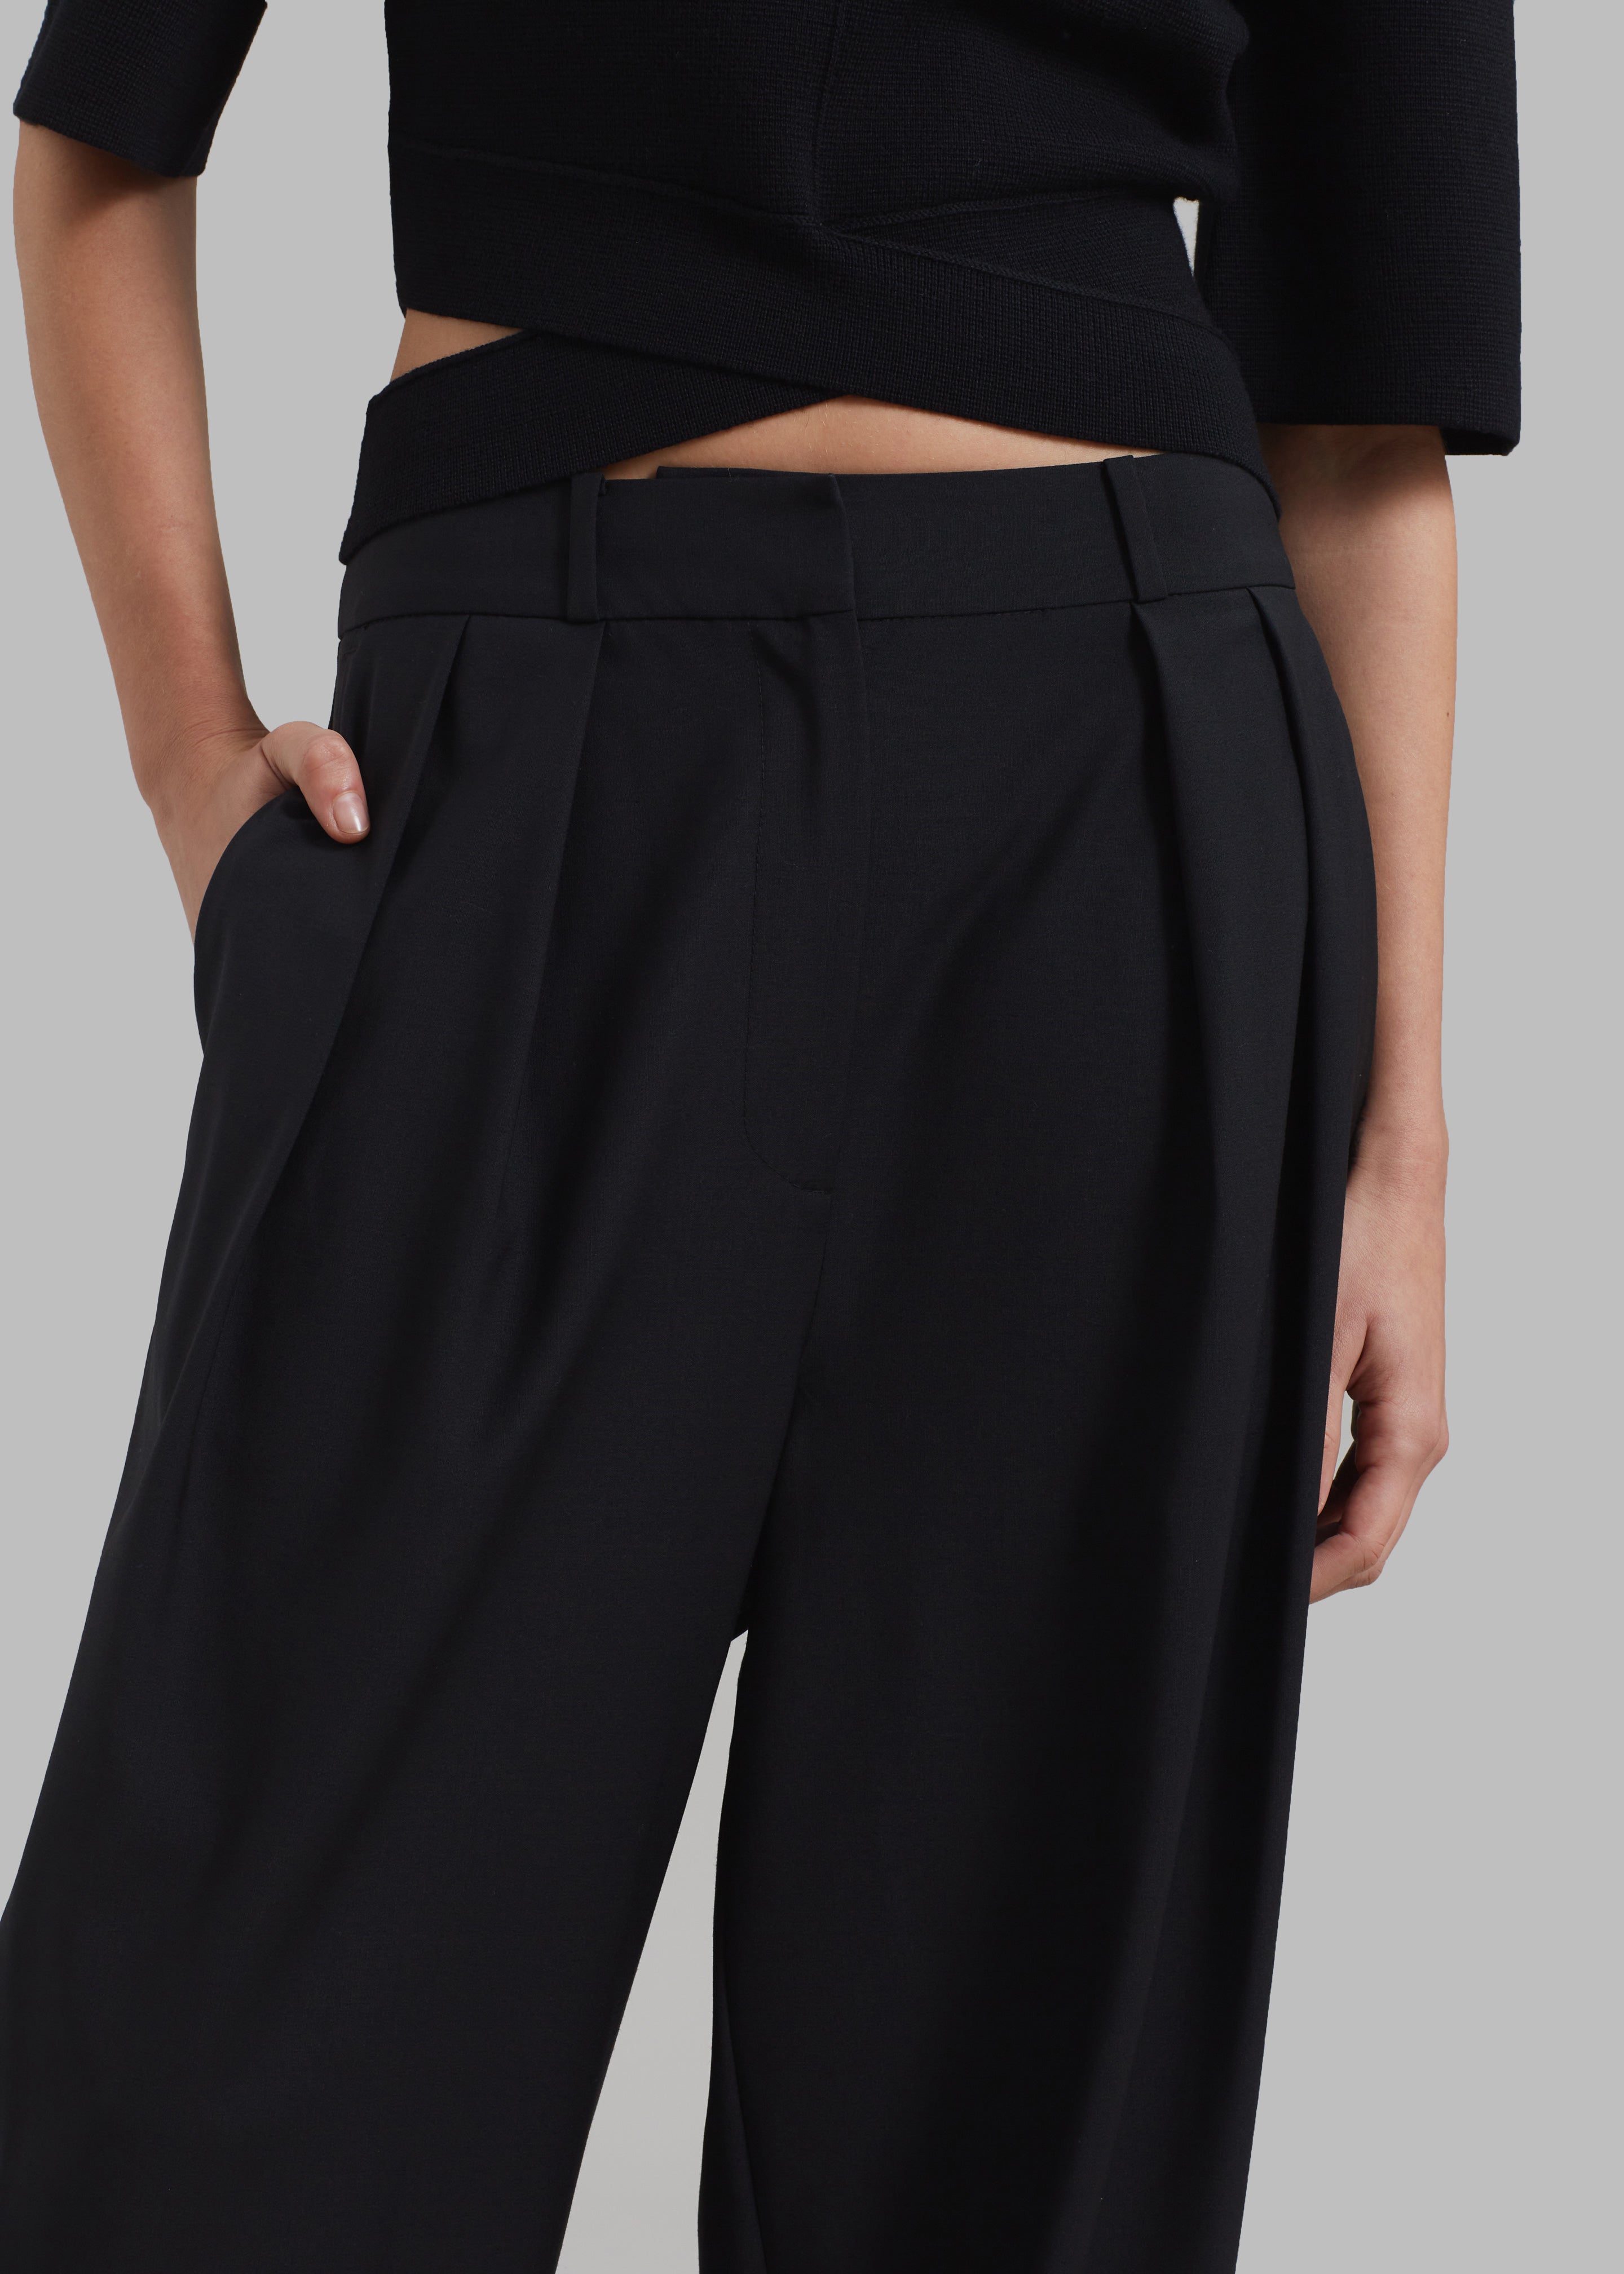 Ripley Pleated Trousers - Black - 2